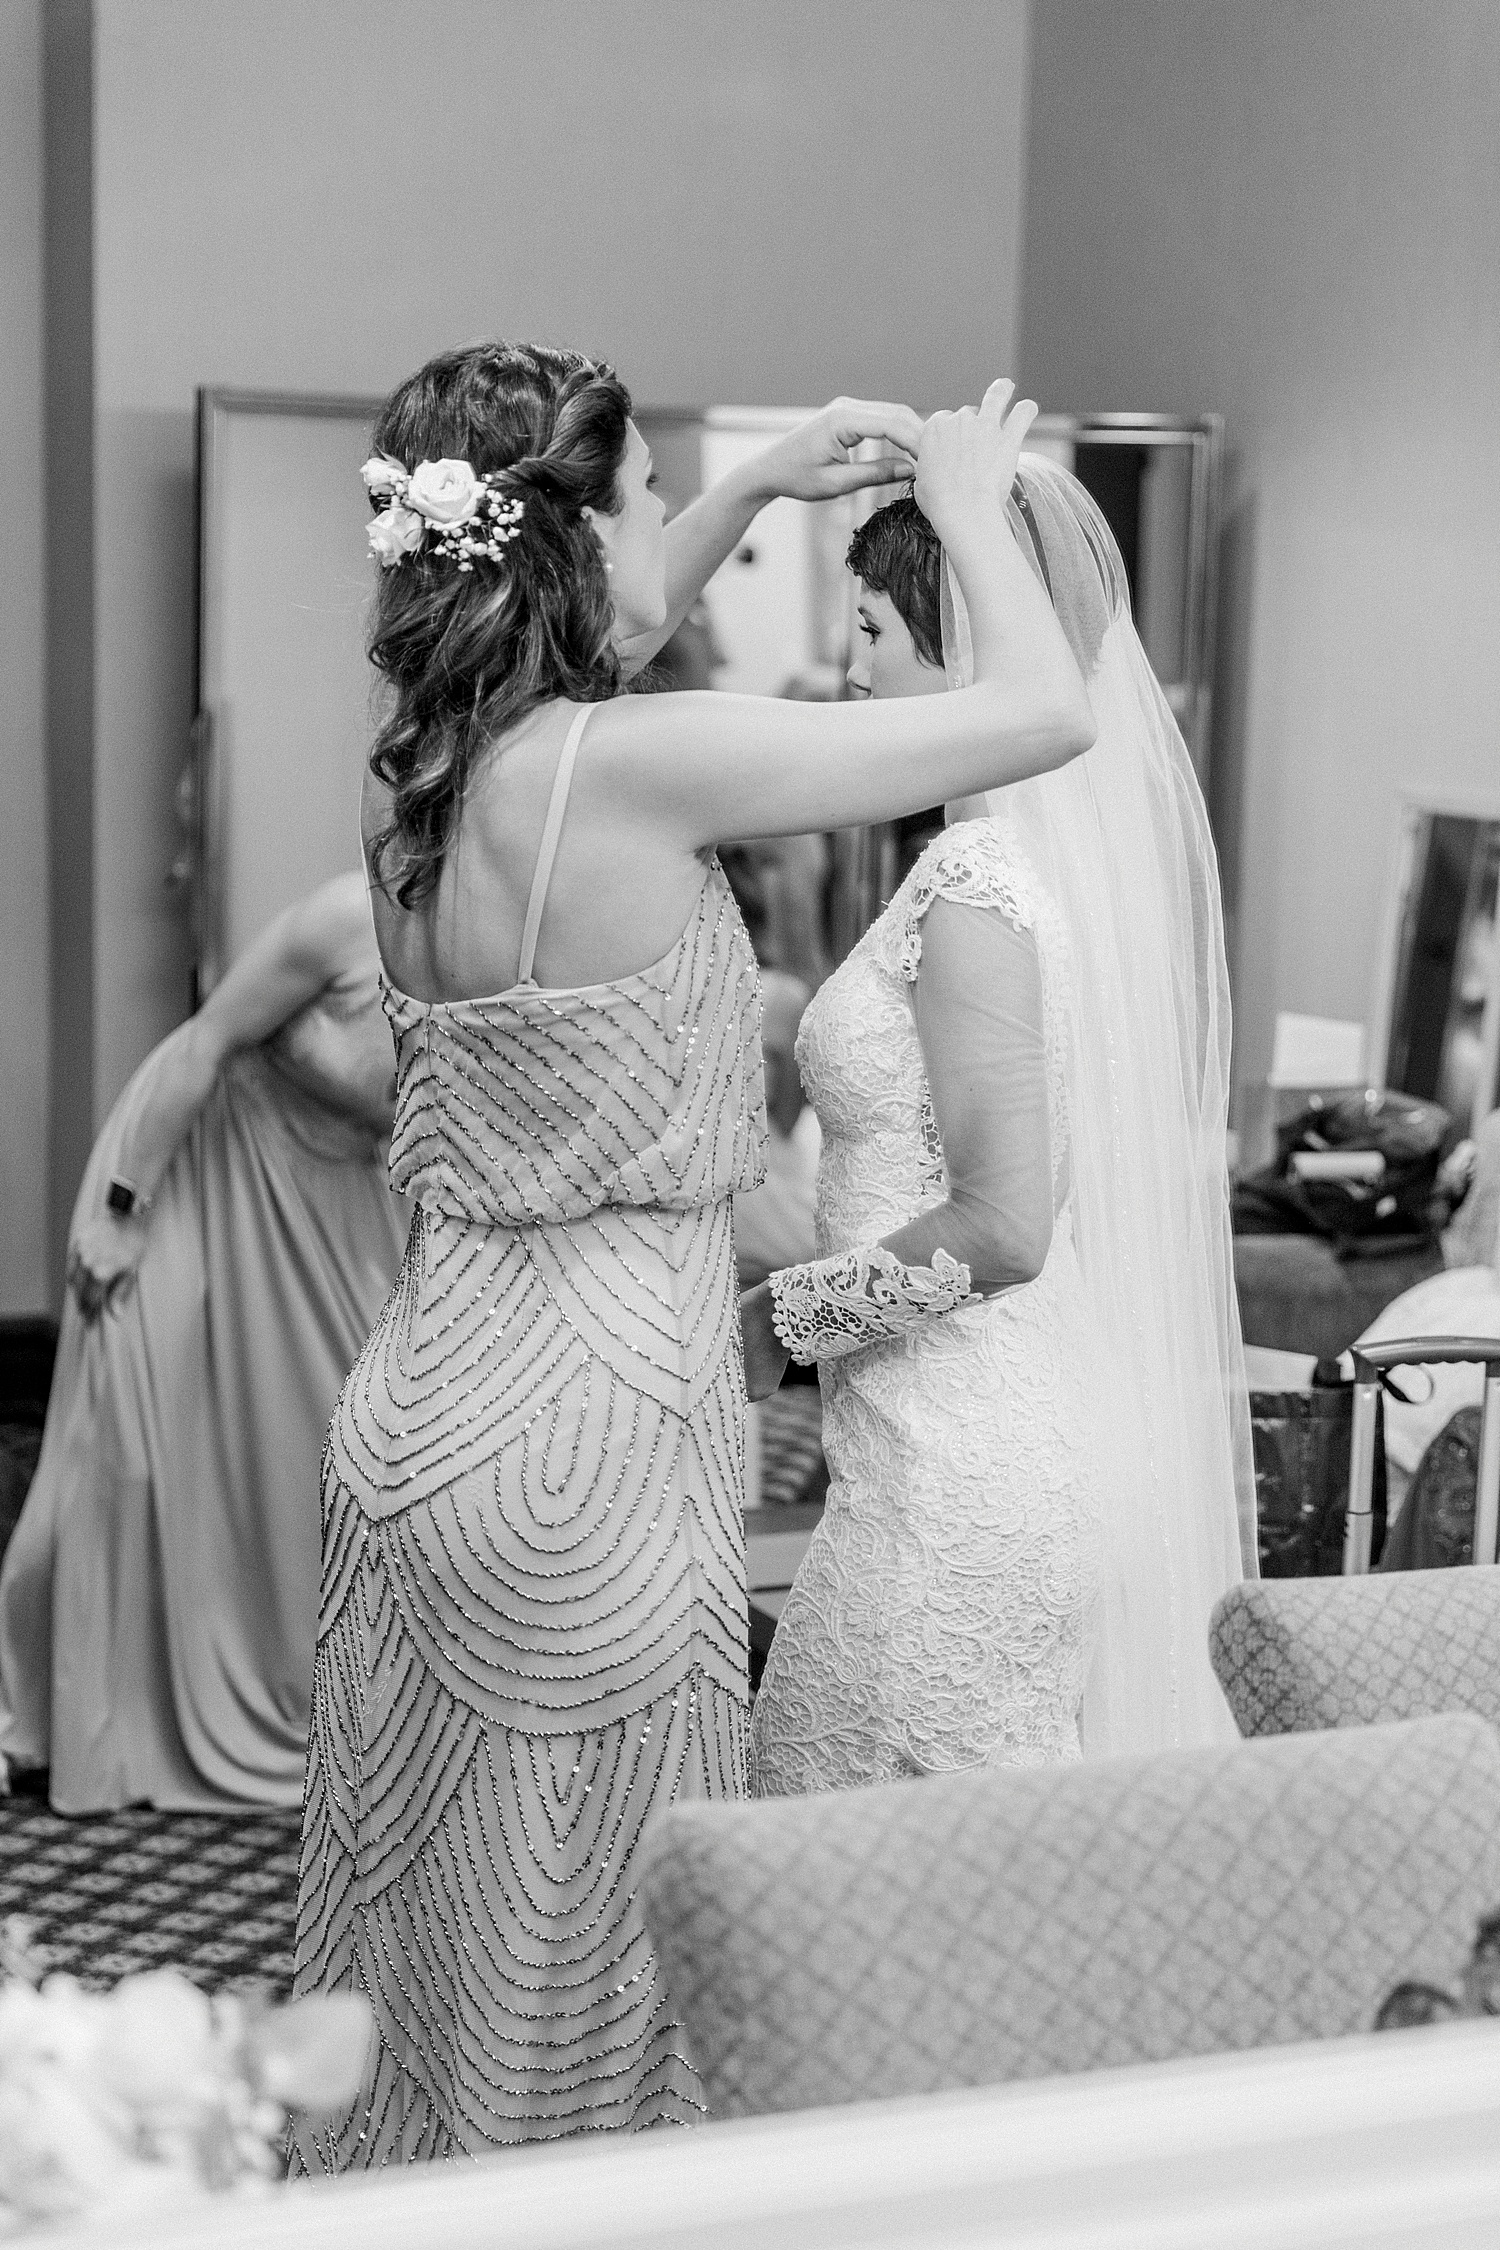 Bridesmaid helps bride with hair and veil